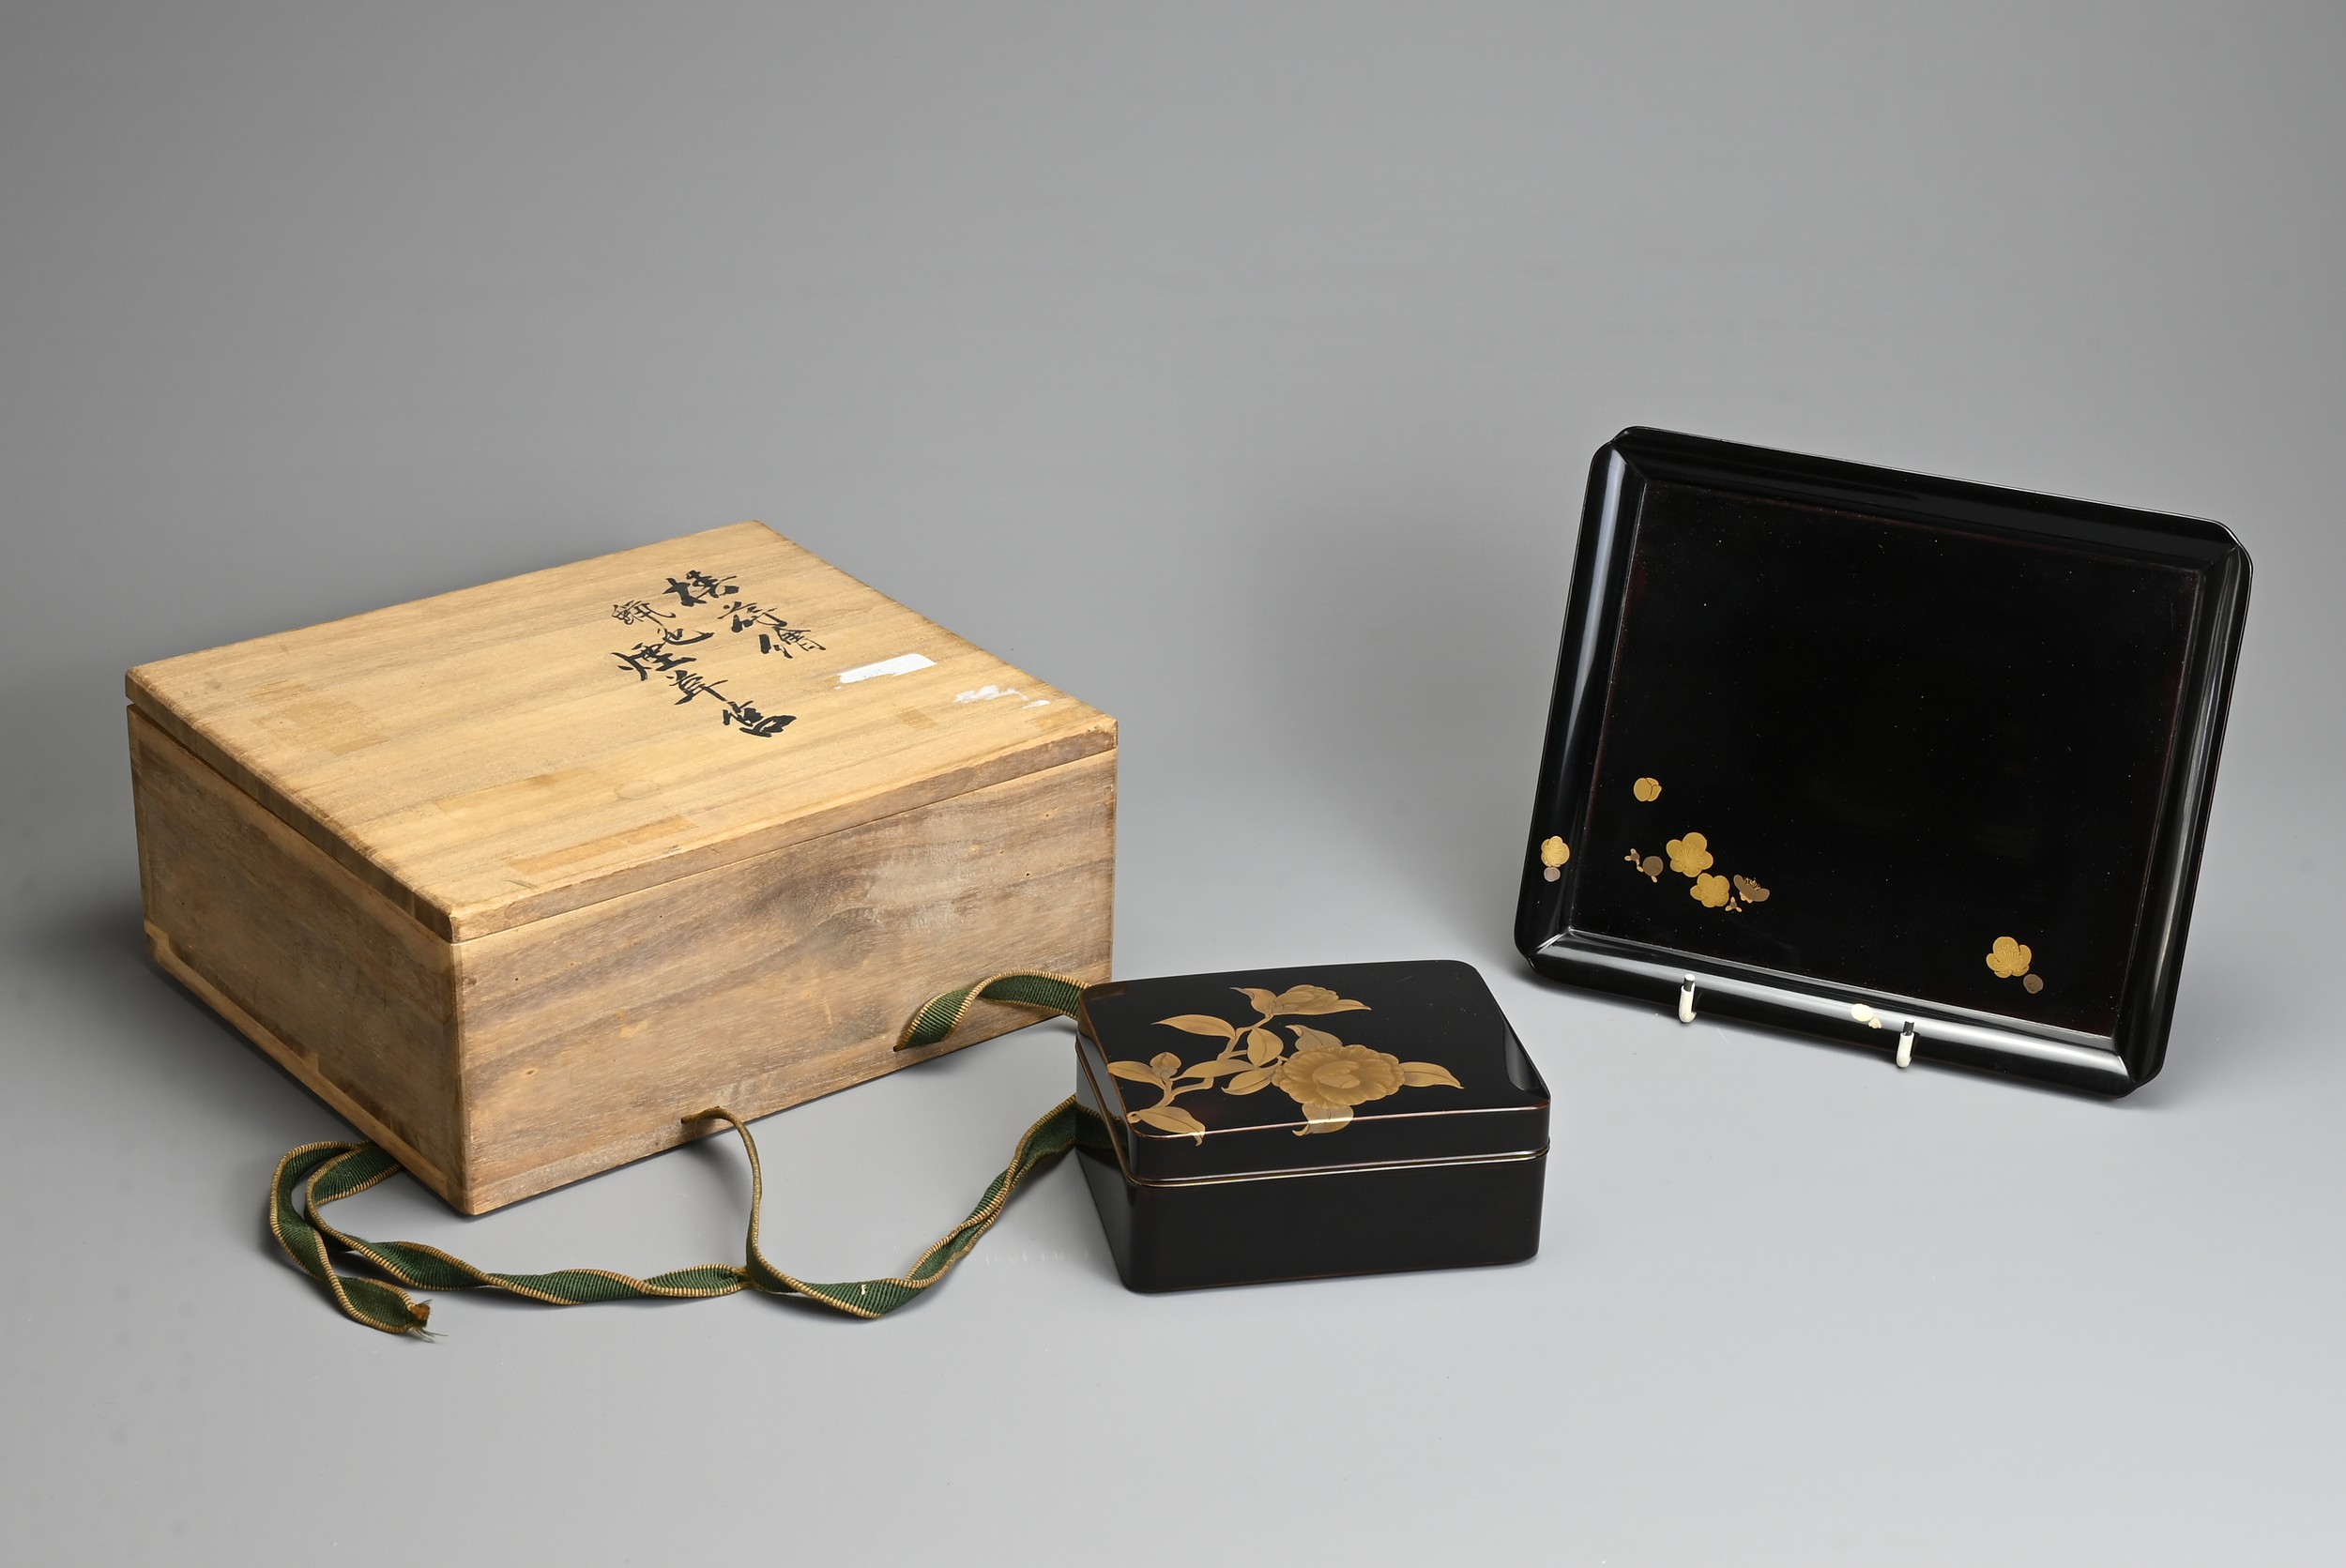 A JAPANESE EARLY 20TH CENTURY, LACQUER WRITING BOX (SUZURIBAKO). Decorated with gold, silver and red